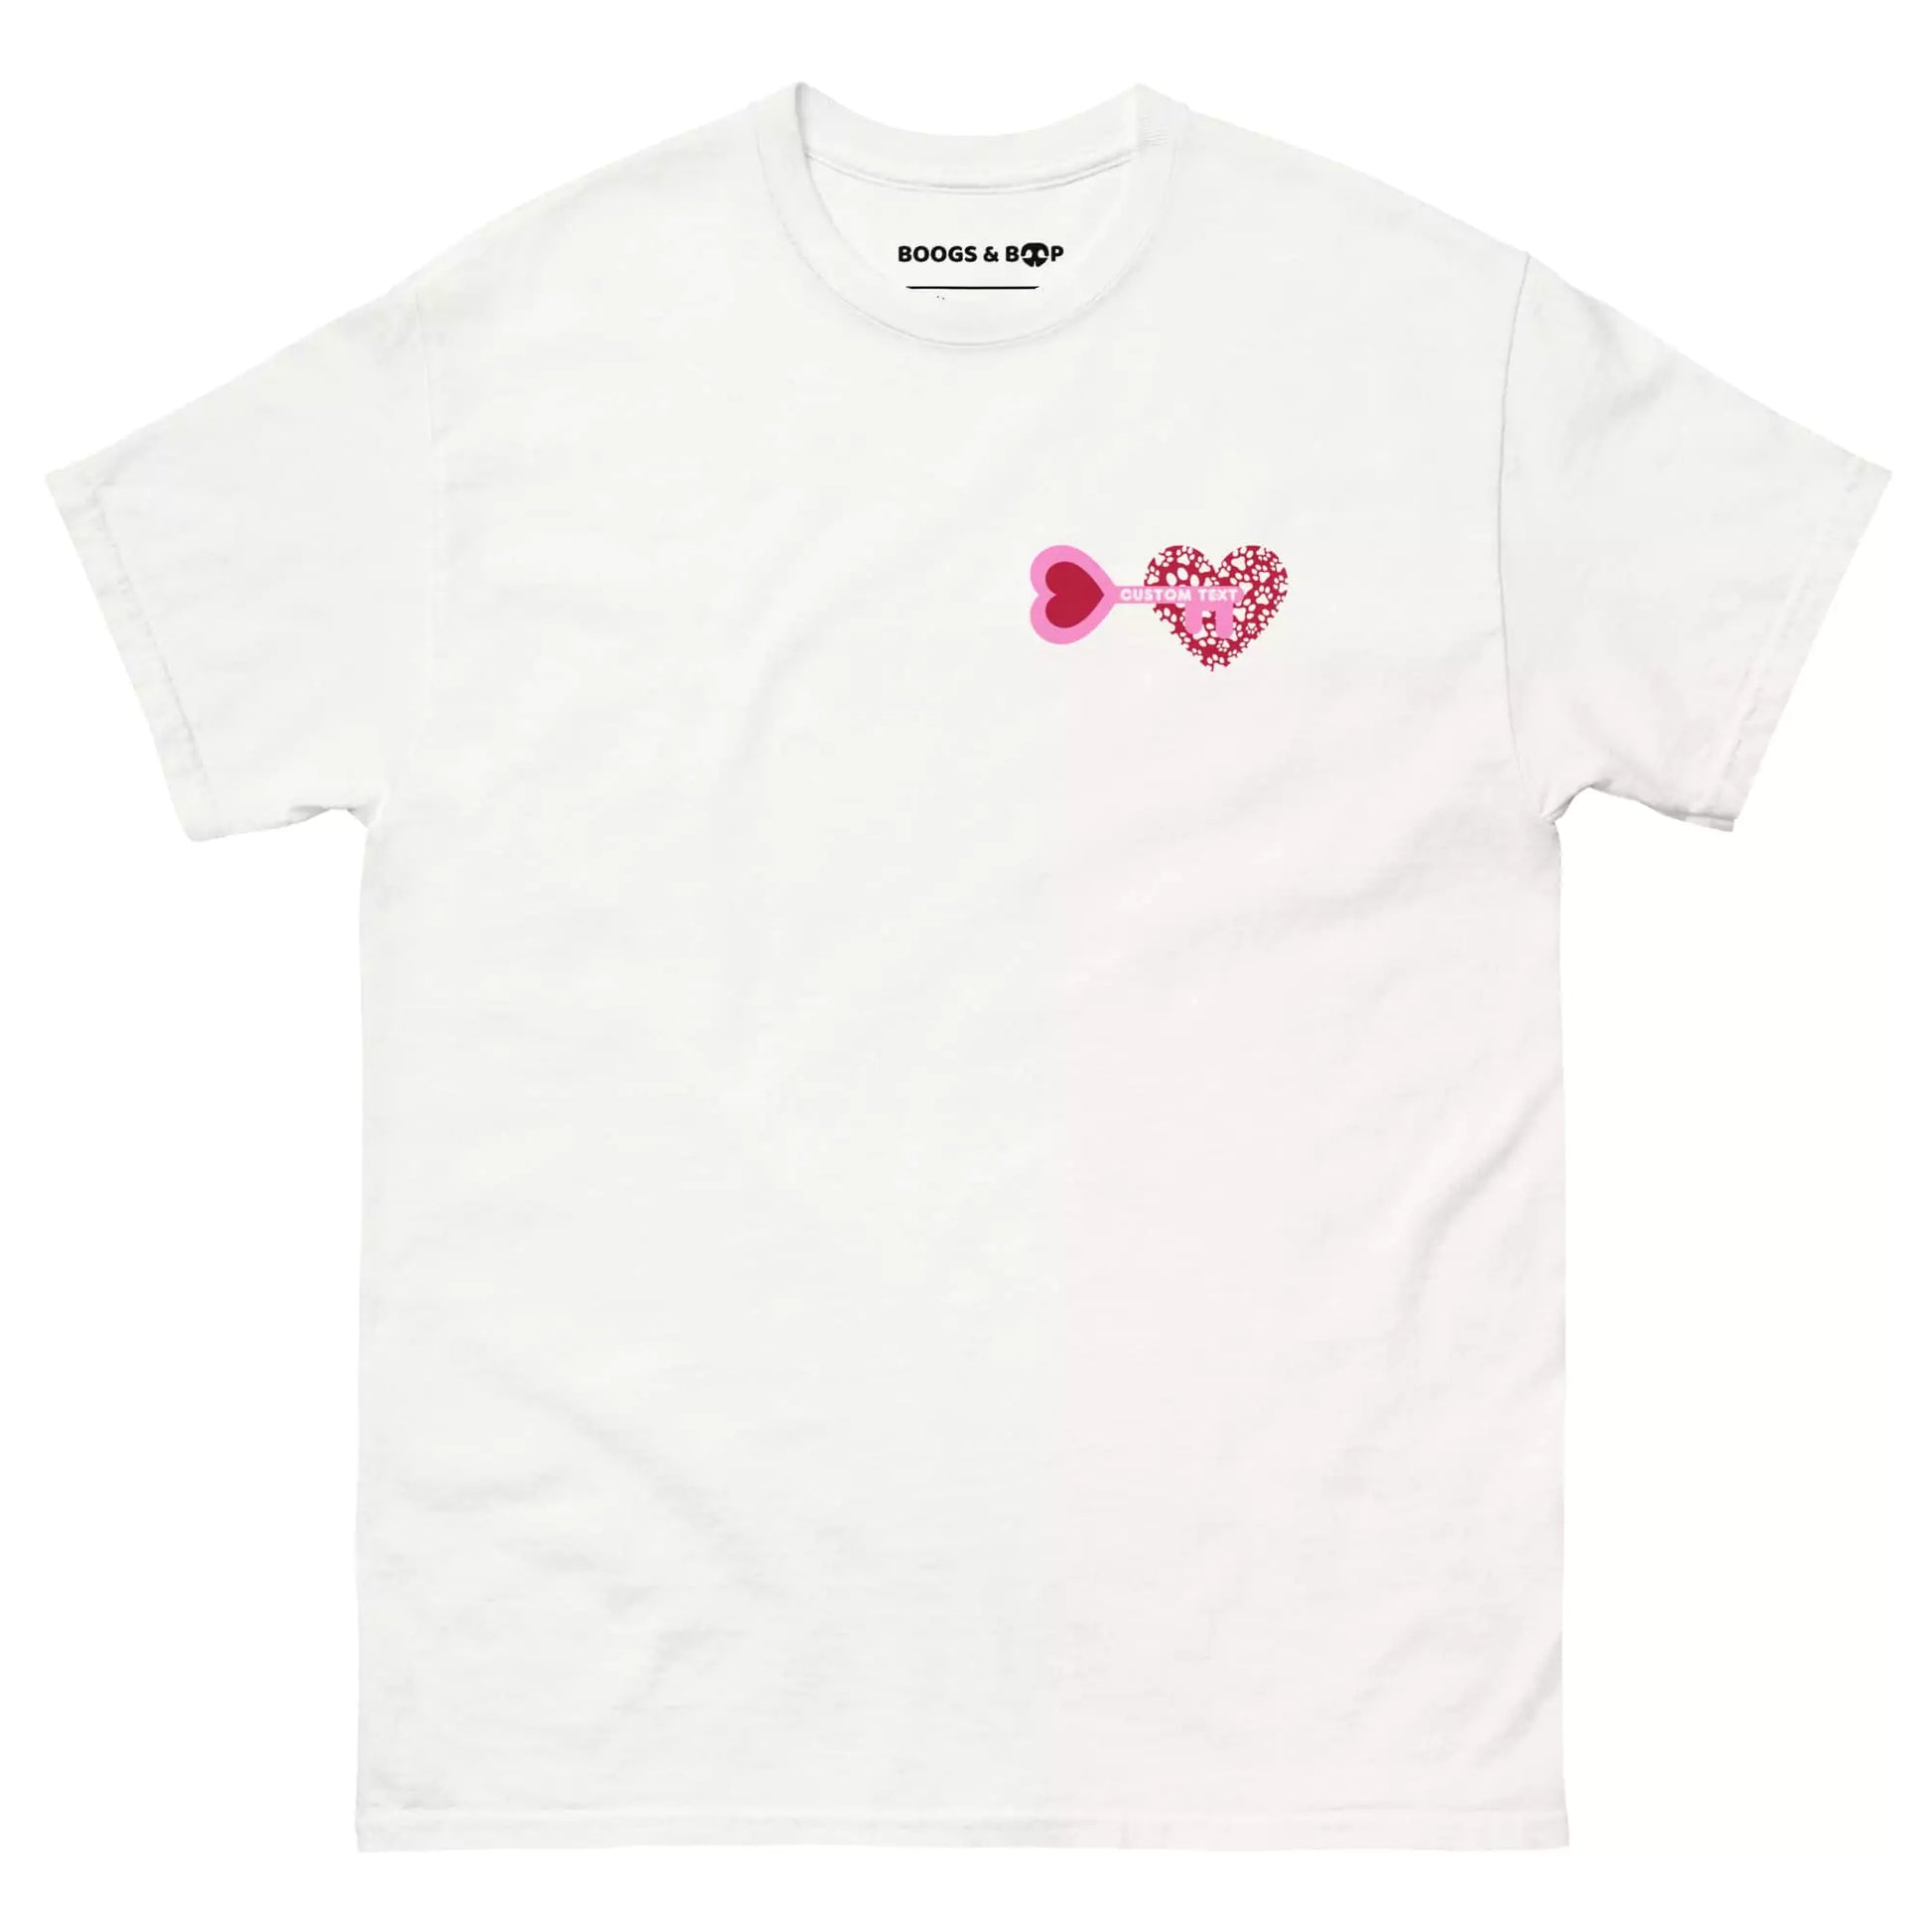 Shop Personalized My Dog Holds the Pink Key to My Red Heart T-Shirt by Boogs & Boop.